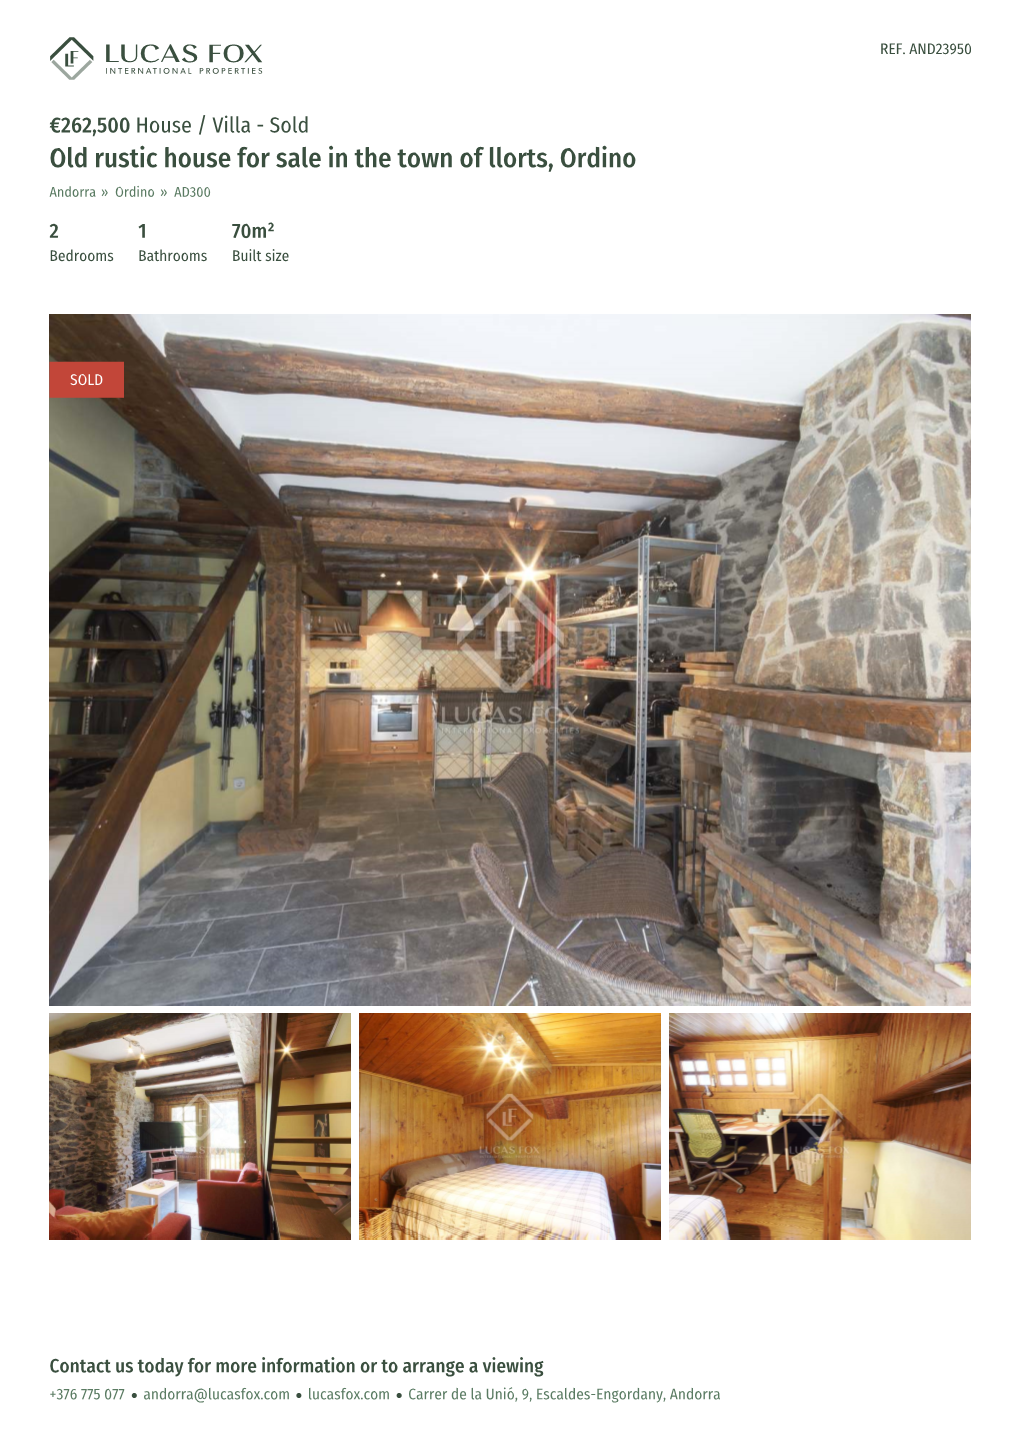 Old Rustic House for Sale in the Town of Llorts, Ordino Andorra » Ordino » AD300